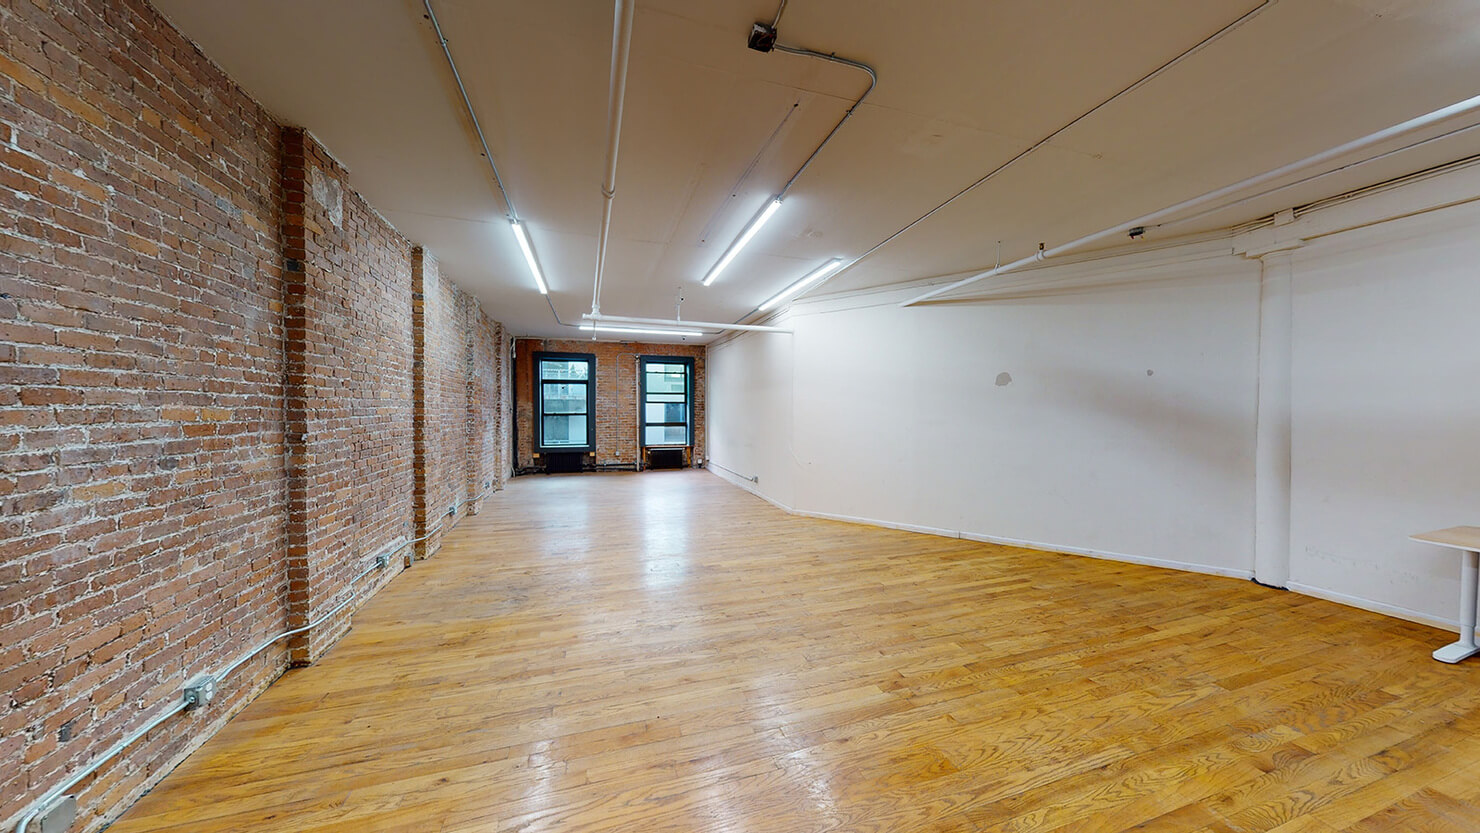 39 West 14th Street Office Space, Suite #407 - Large Gallery Space